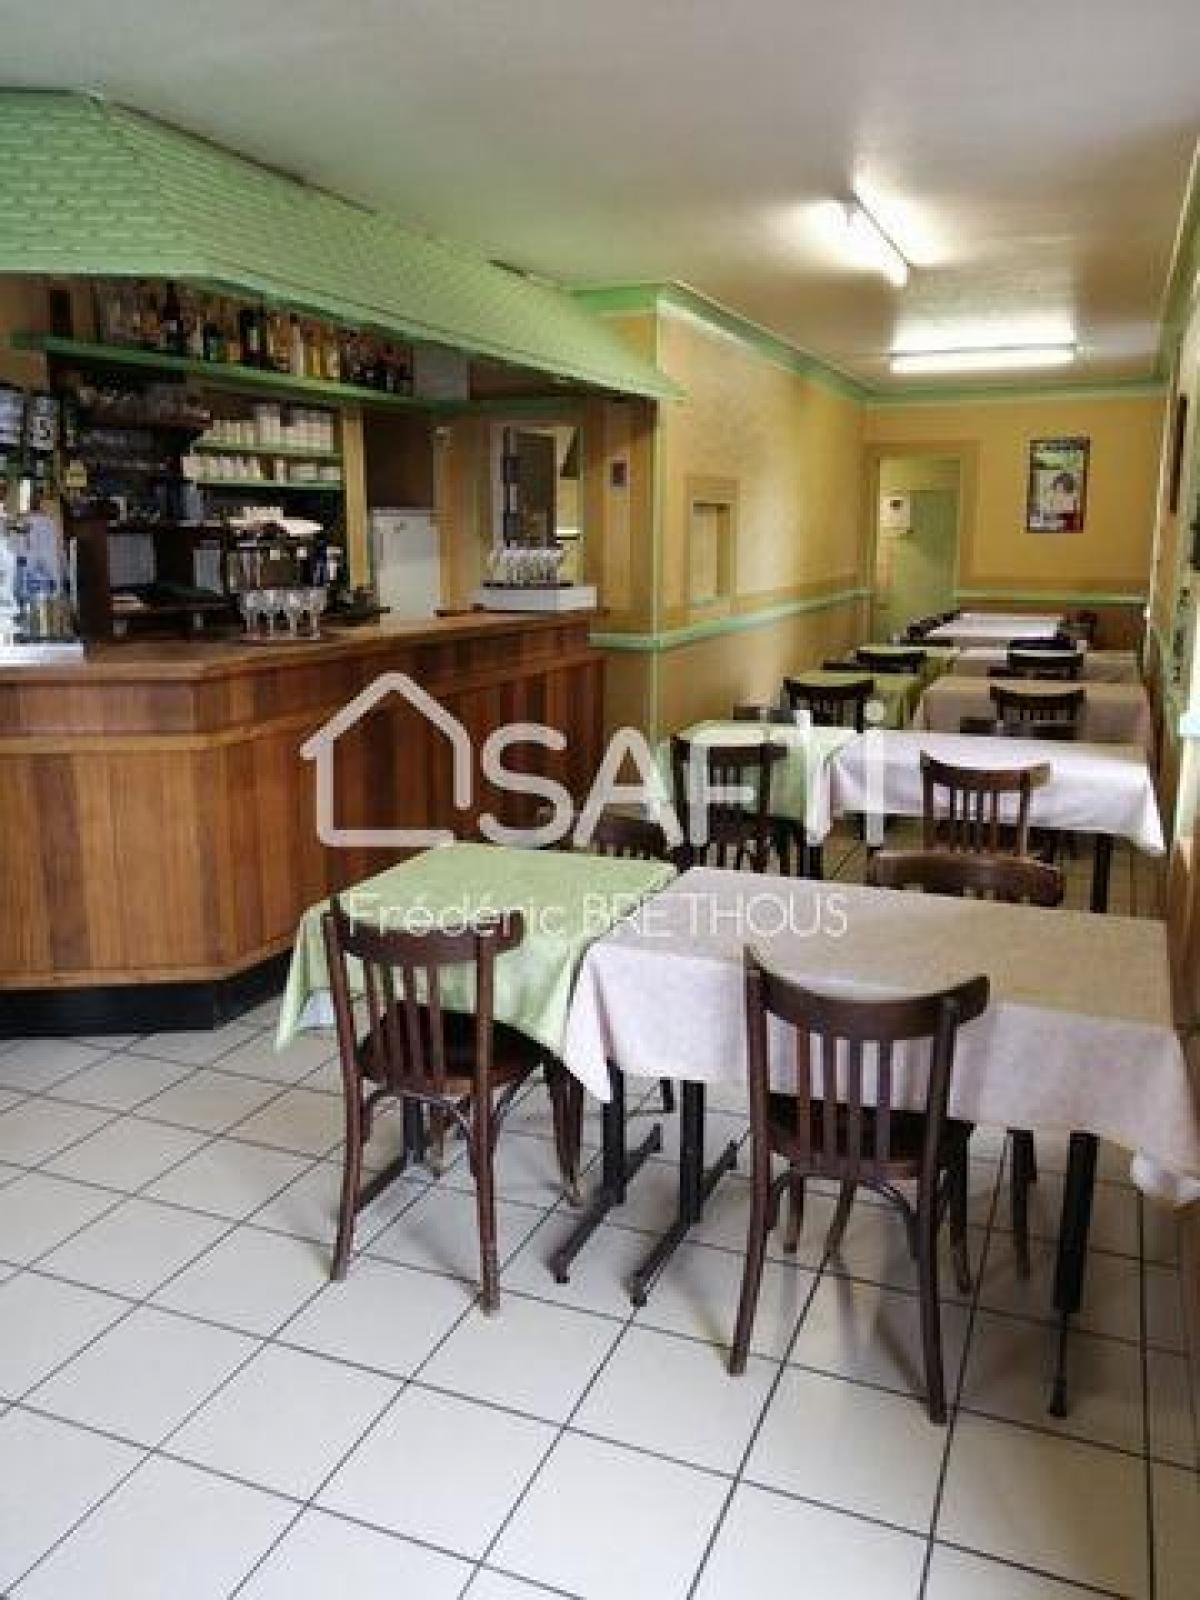 Picture of Office For Sale in Hagetmau, Aquitaine, France